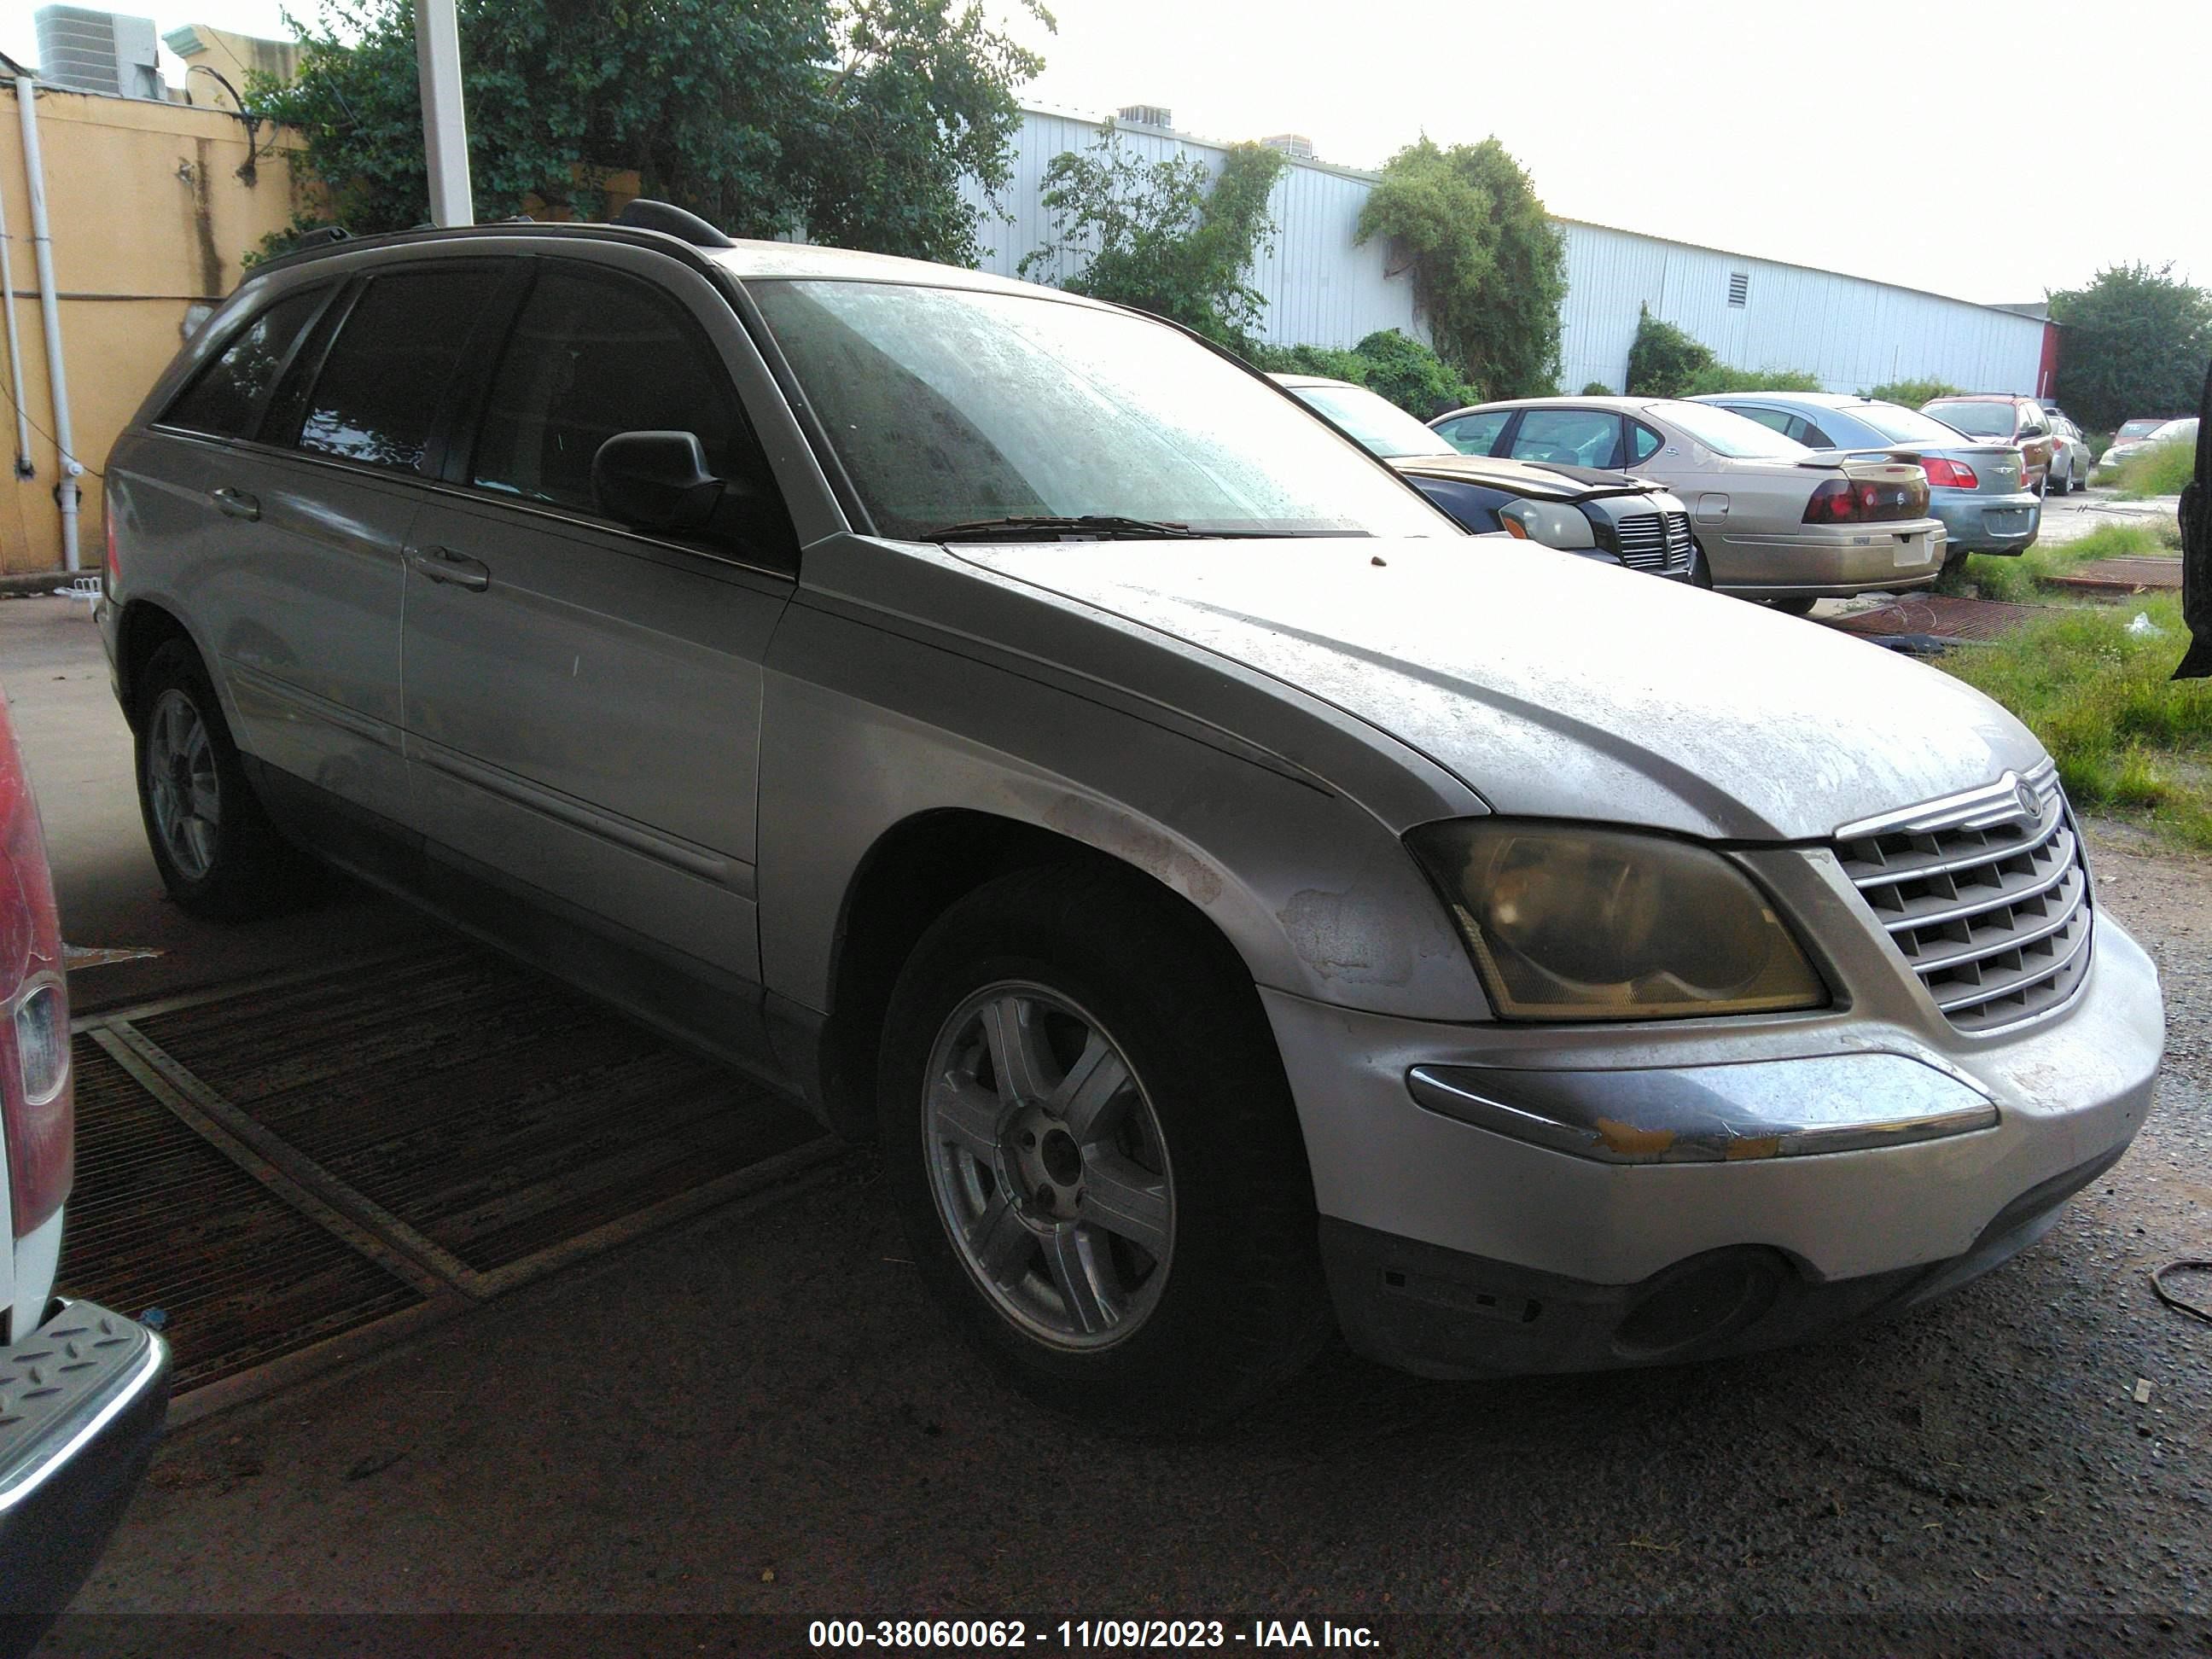 vin: 2C4GM68455R651540 2C4GM68455R651540 2005 chrysler pacifica 3500 for Sale in 78503, 2510 S 23Rd St, Mcallen, USA